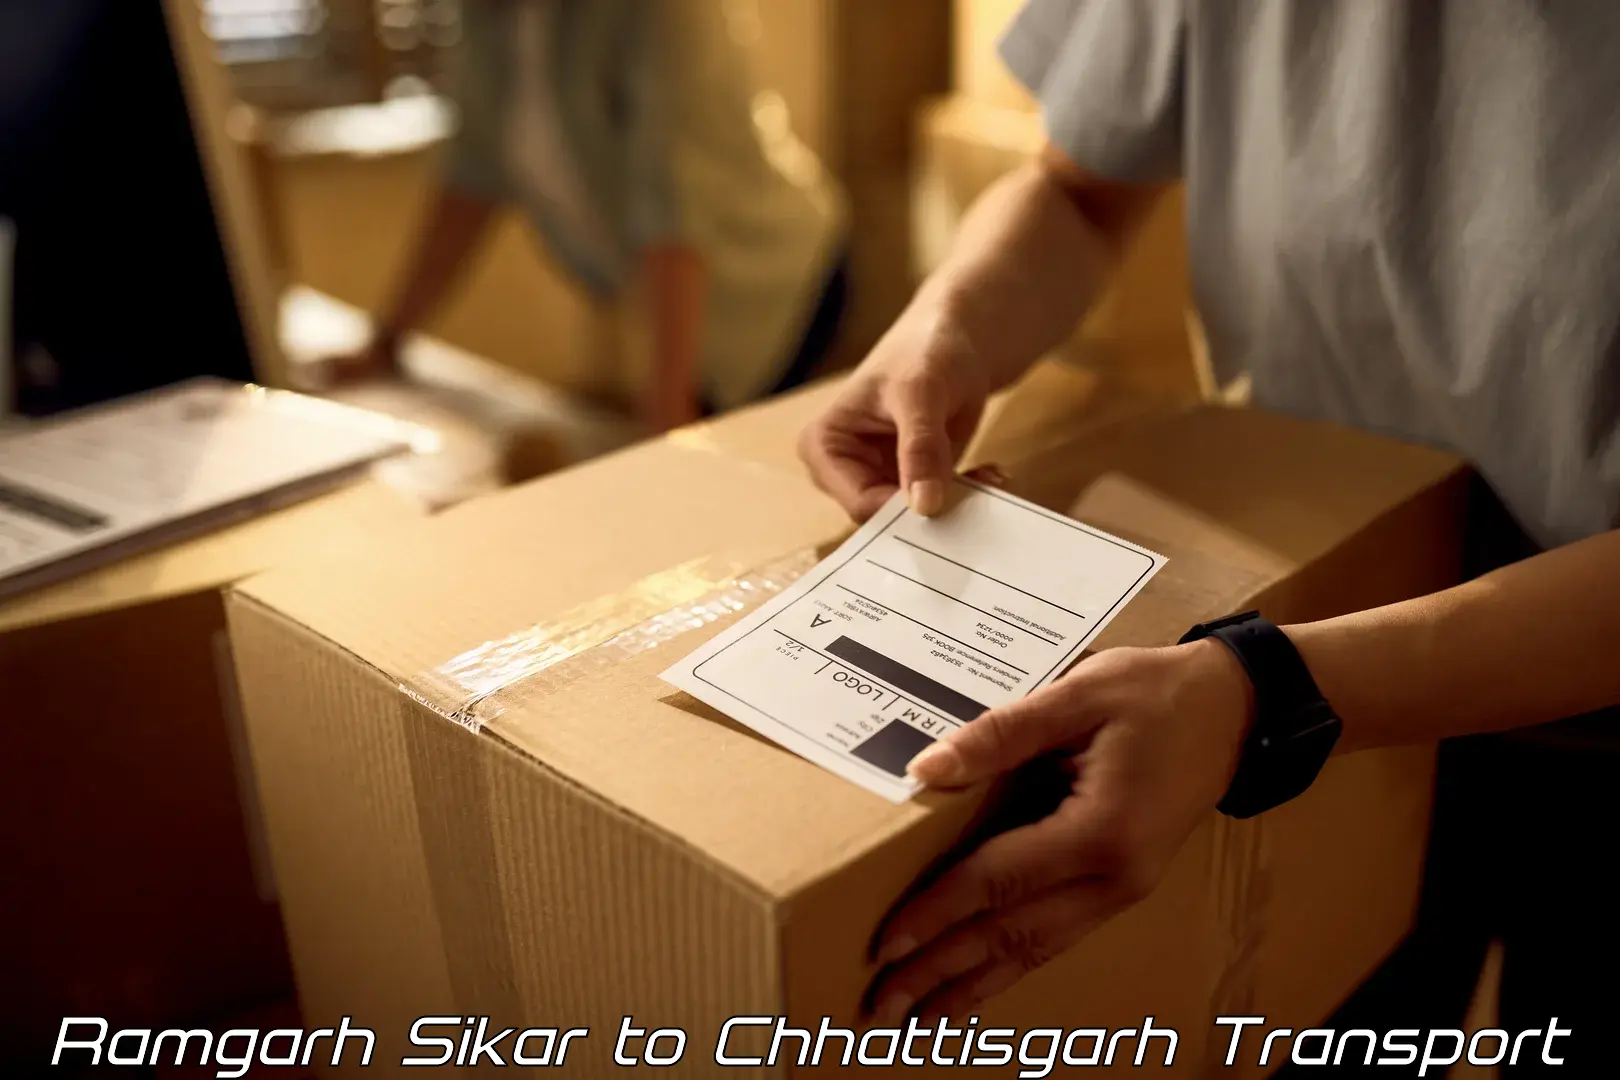 Goods delivery service Ramgarh Sikar to Khairagarh